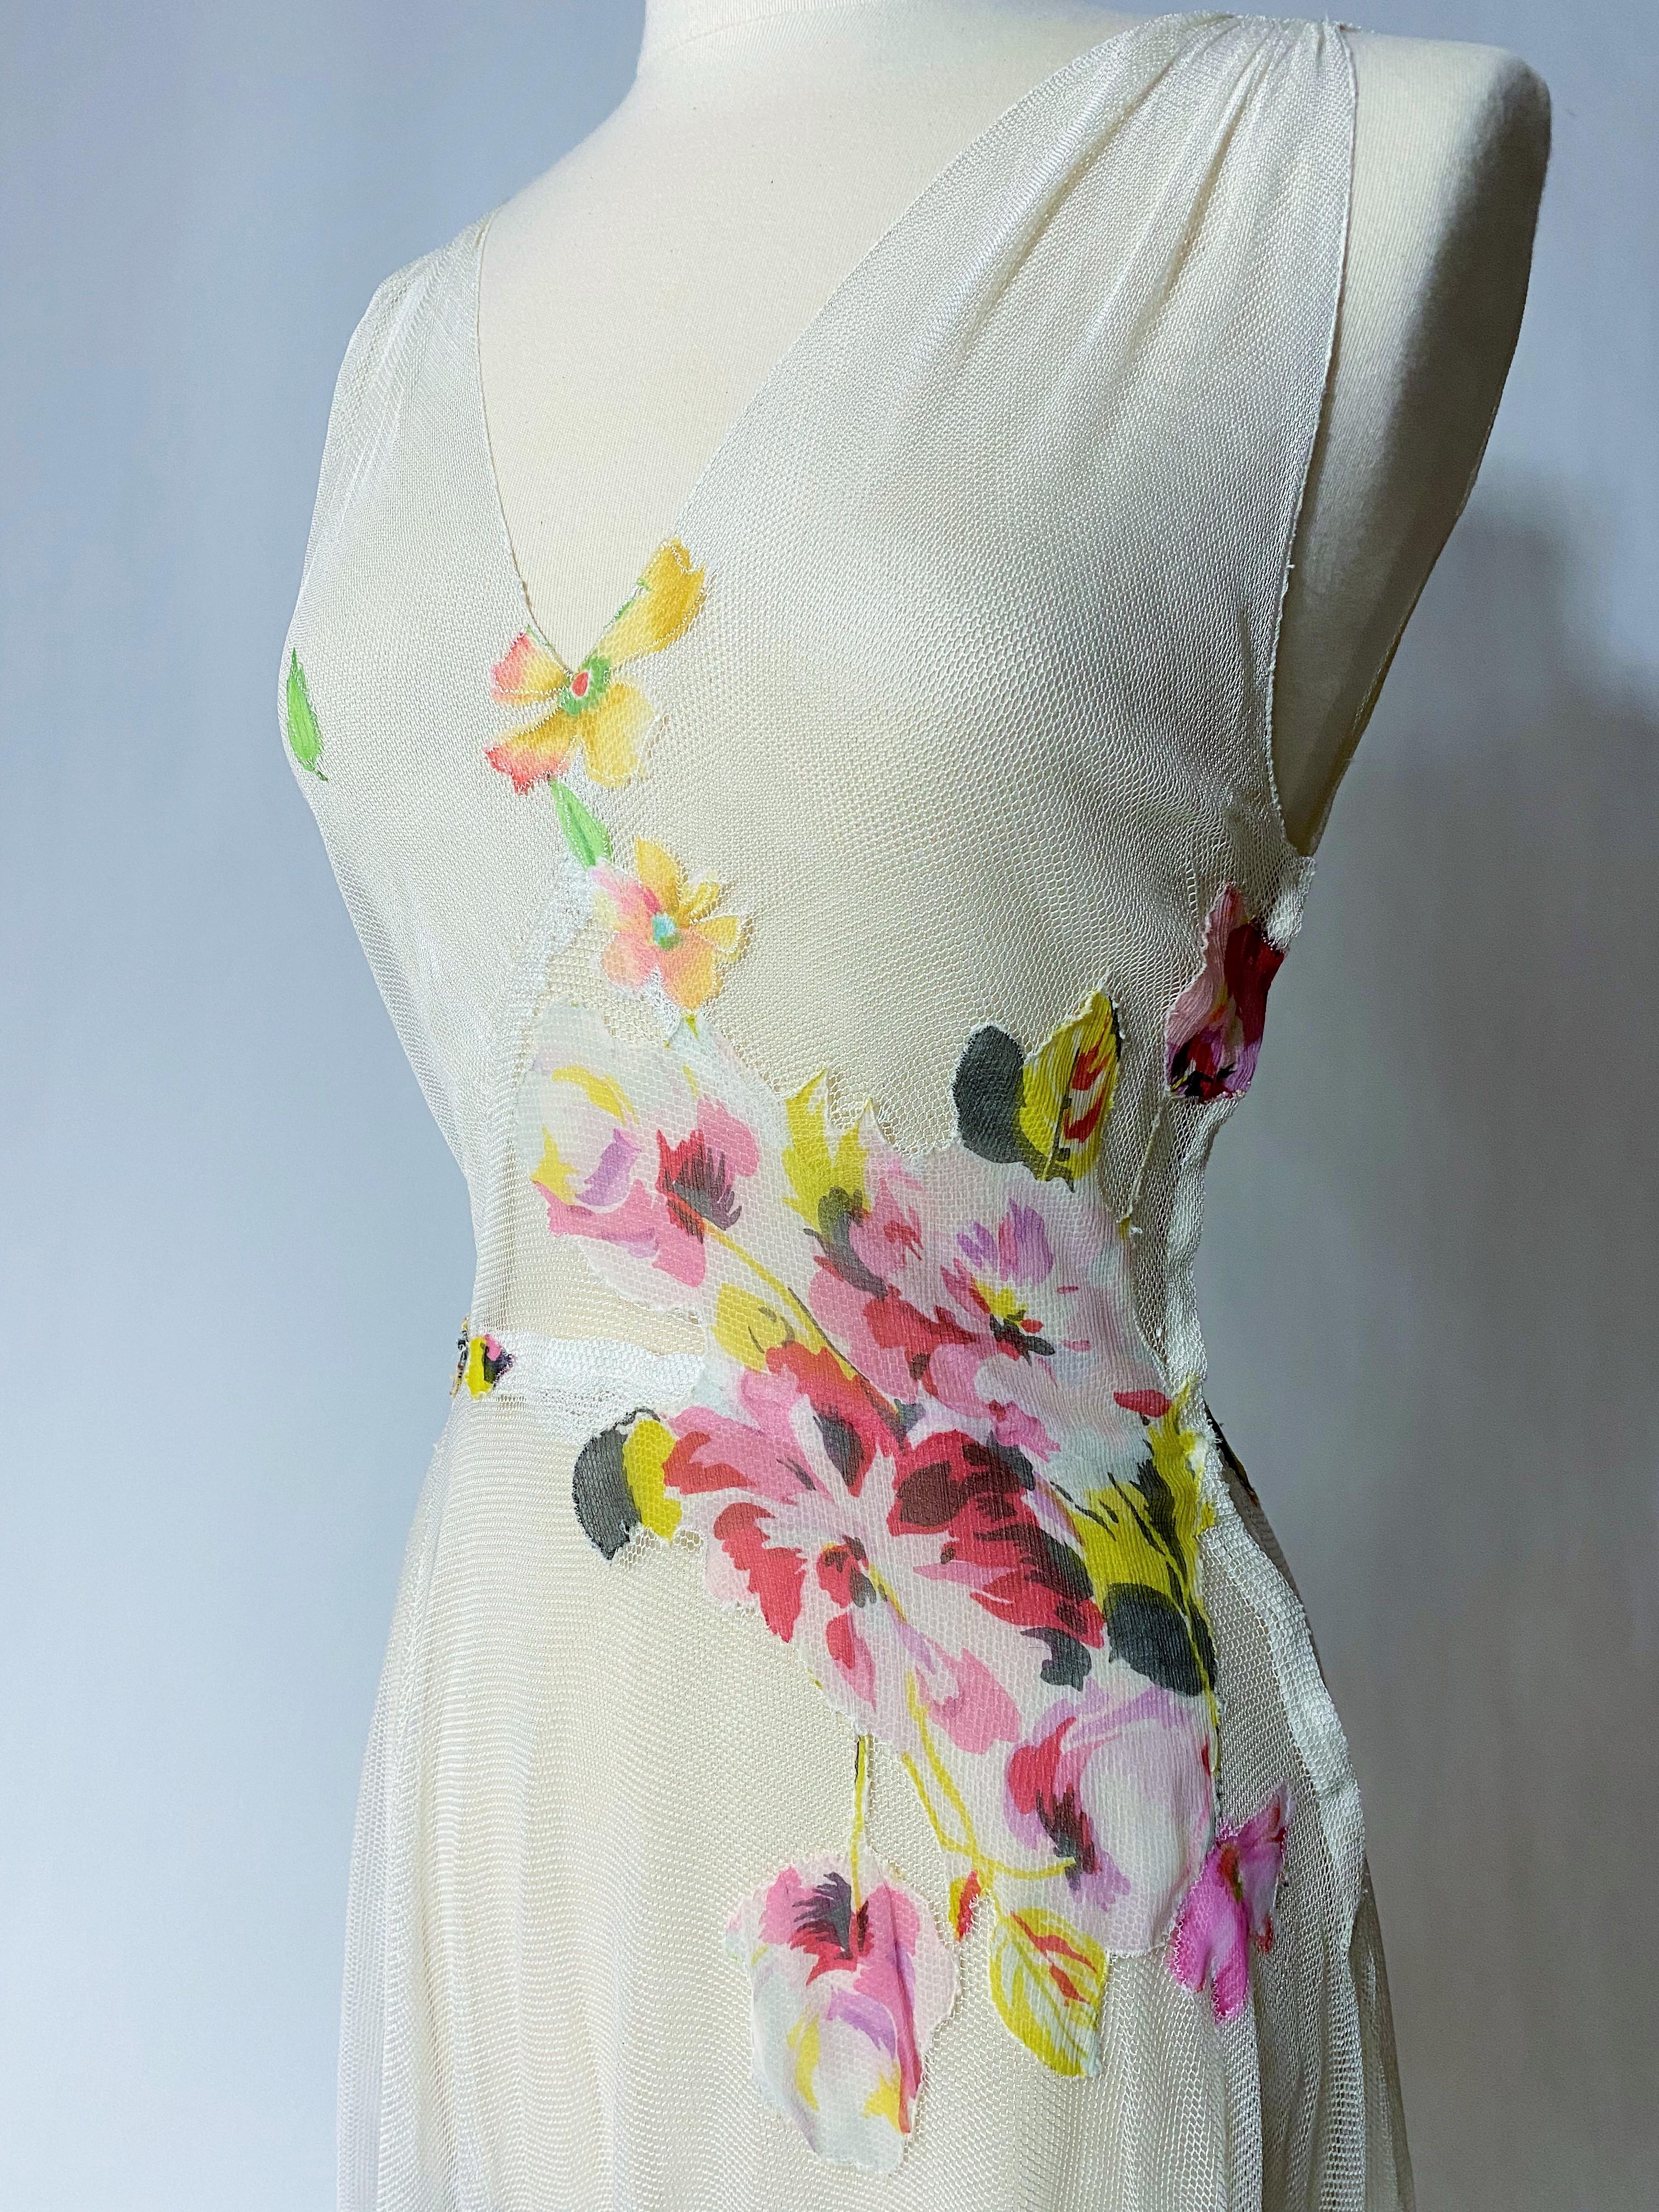 Circa 1935-1940

France

Summer long dress, made of white cotton net tulle applied with floral printed silk chiffon, with an assumed romanticism and dating from the late 1930s. Sleeveless dress with plunging V neckline, closed laterally by snaps.